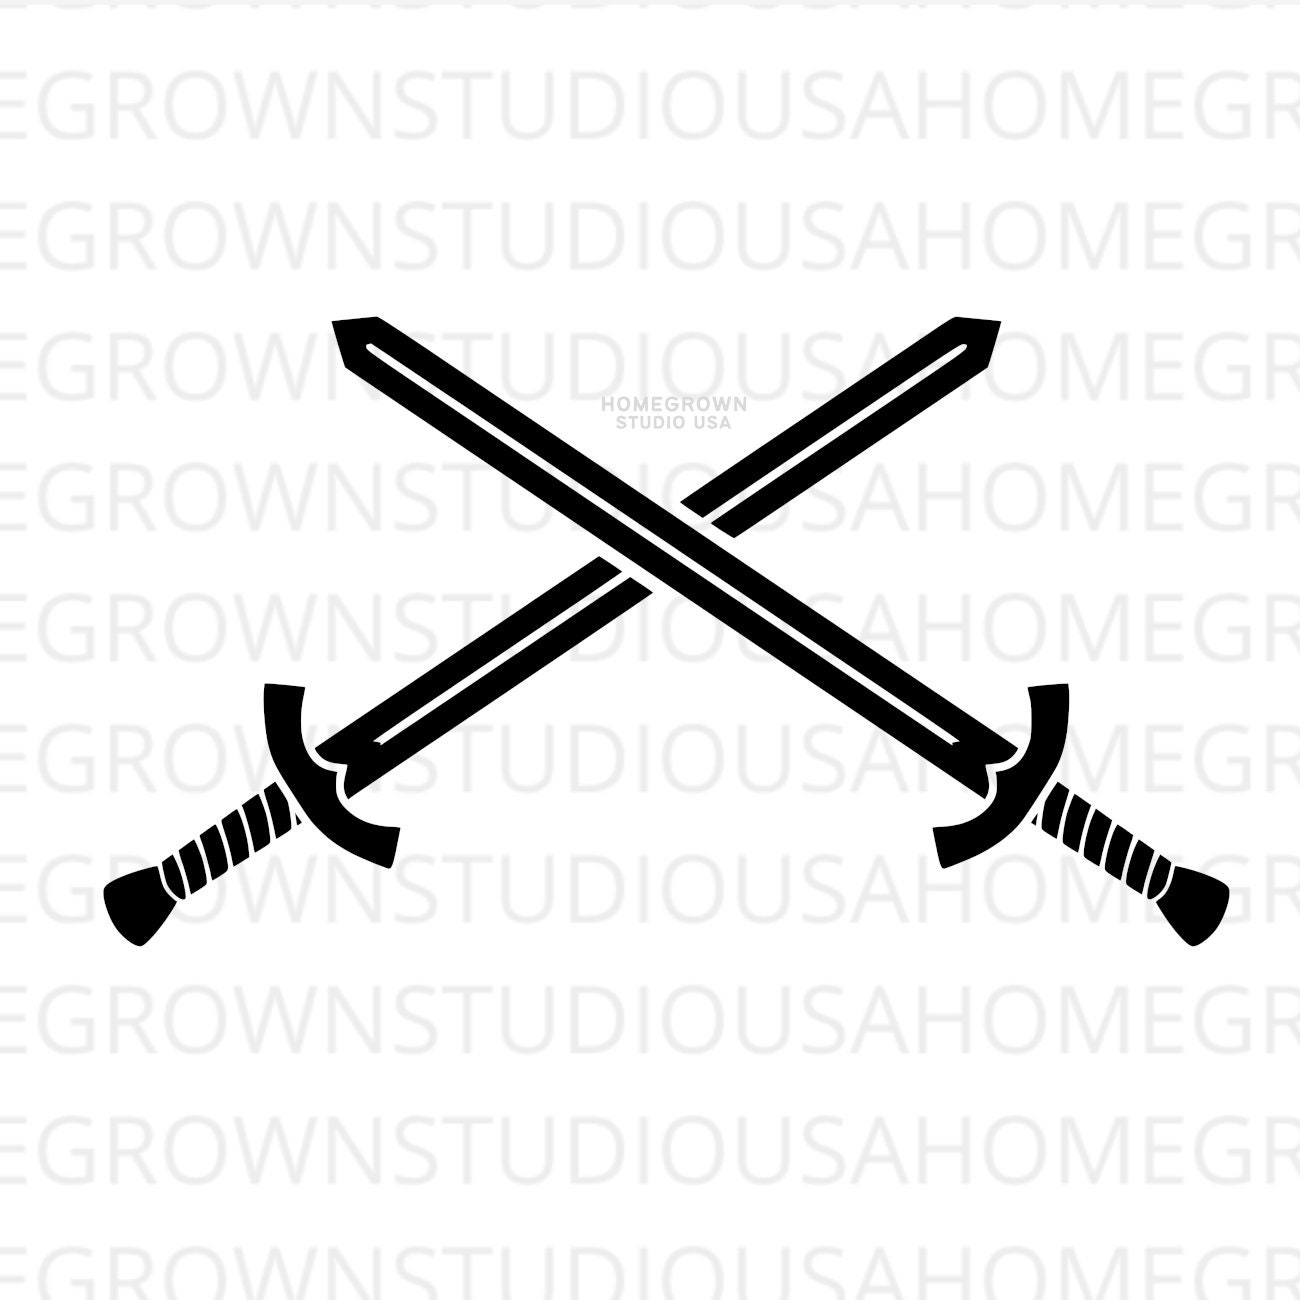 File:Crossed swords.svg - Wikimedia Commons